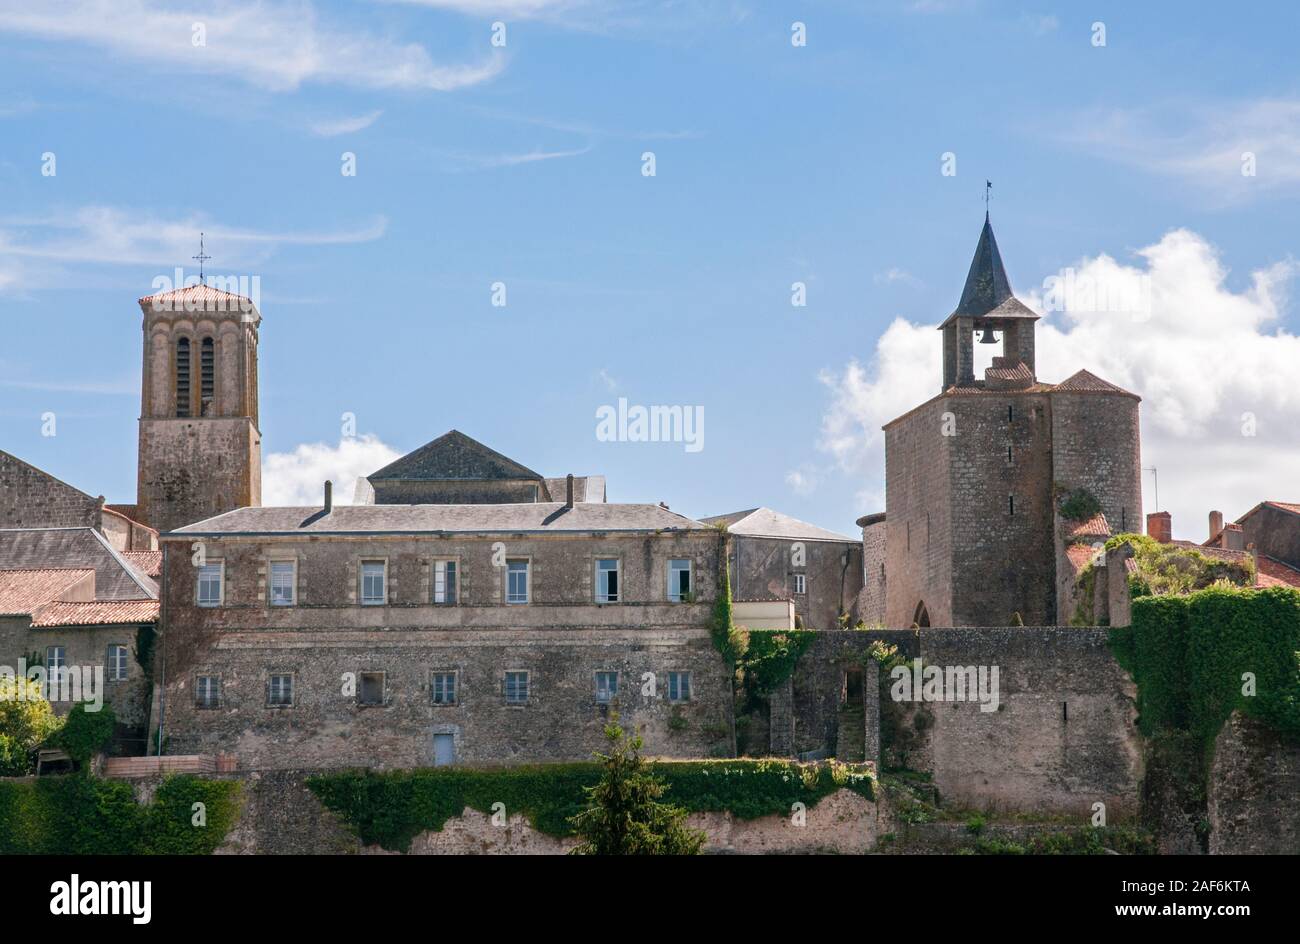 View of the church of Sainte-Croix, a listed historic heritage monument and Porte de la Citadelle or Horloge (gate of the Citadel), Parthenay, France Stock Photo